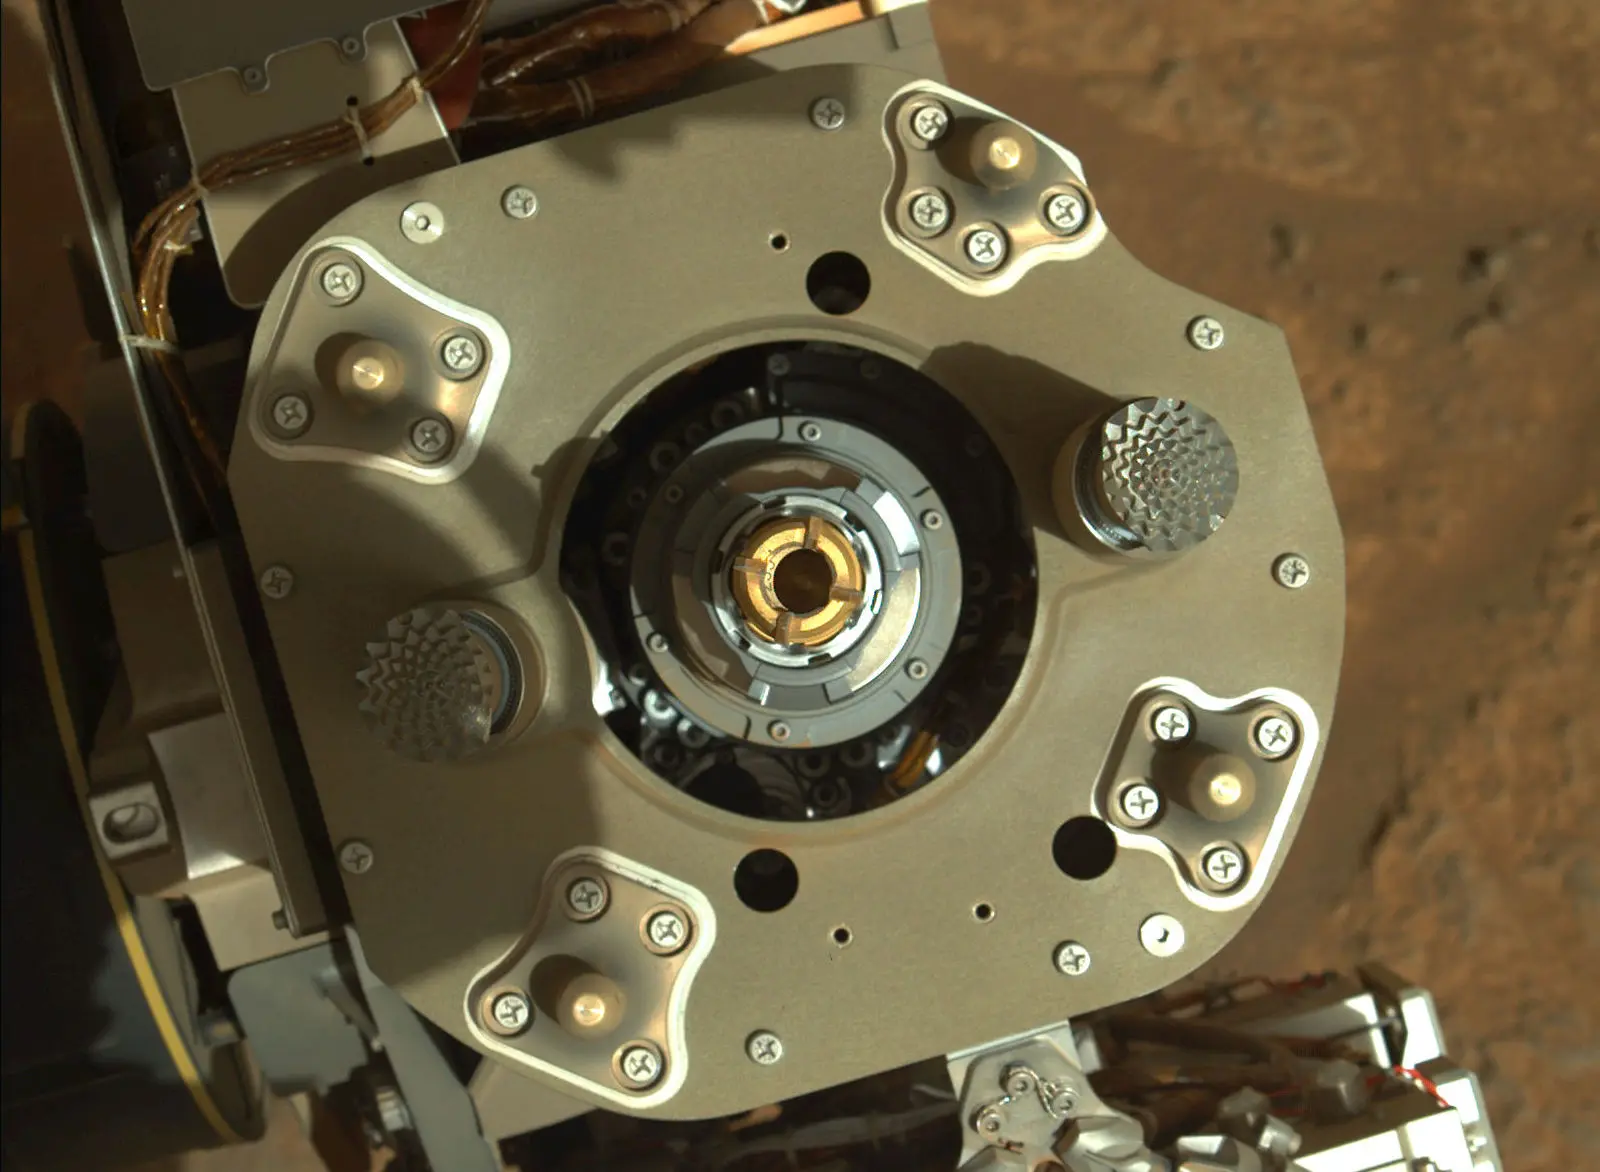 Sample Tube in Perseverance's Coring Drill: This enhanced-color image from the Mastcam-Z instrument aboard NASA’s Perseverance rover shows sample tube inside the coring bit after the Aug. 6 coring activity was completed. Credits: NASA/JPL-Caltech.